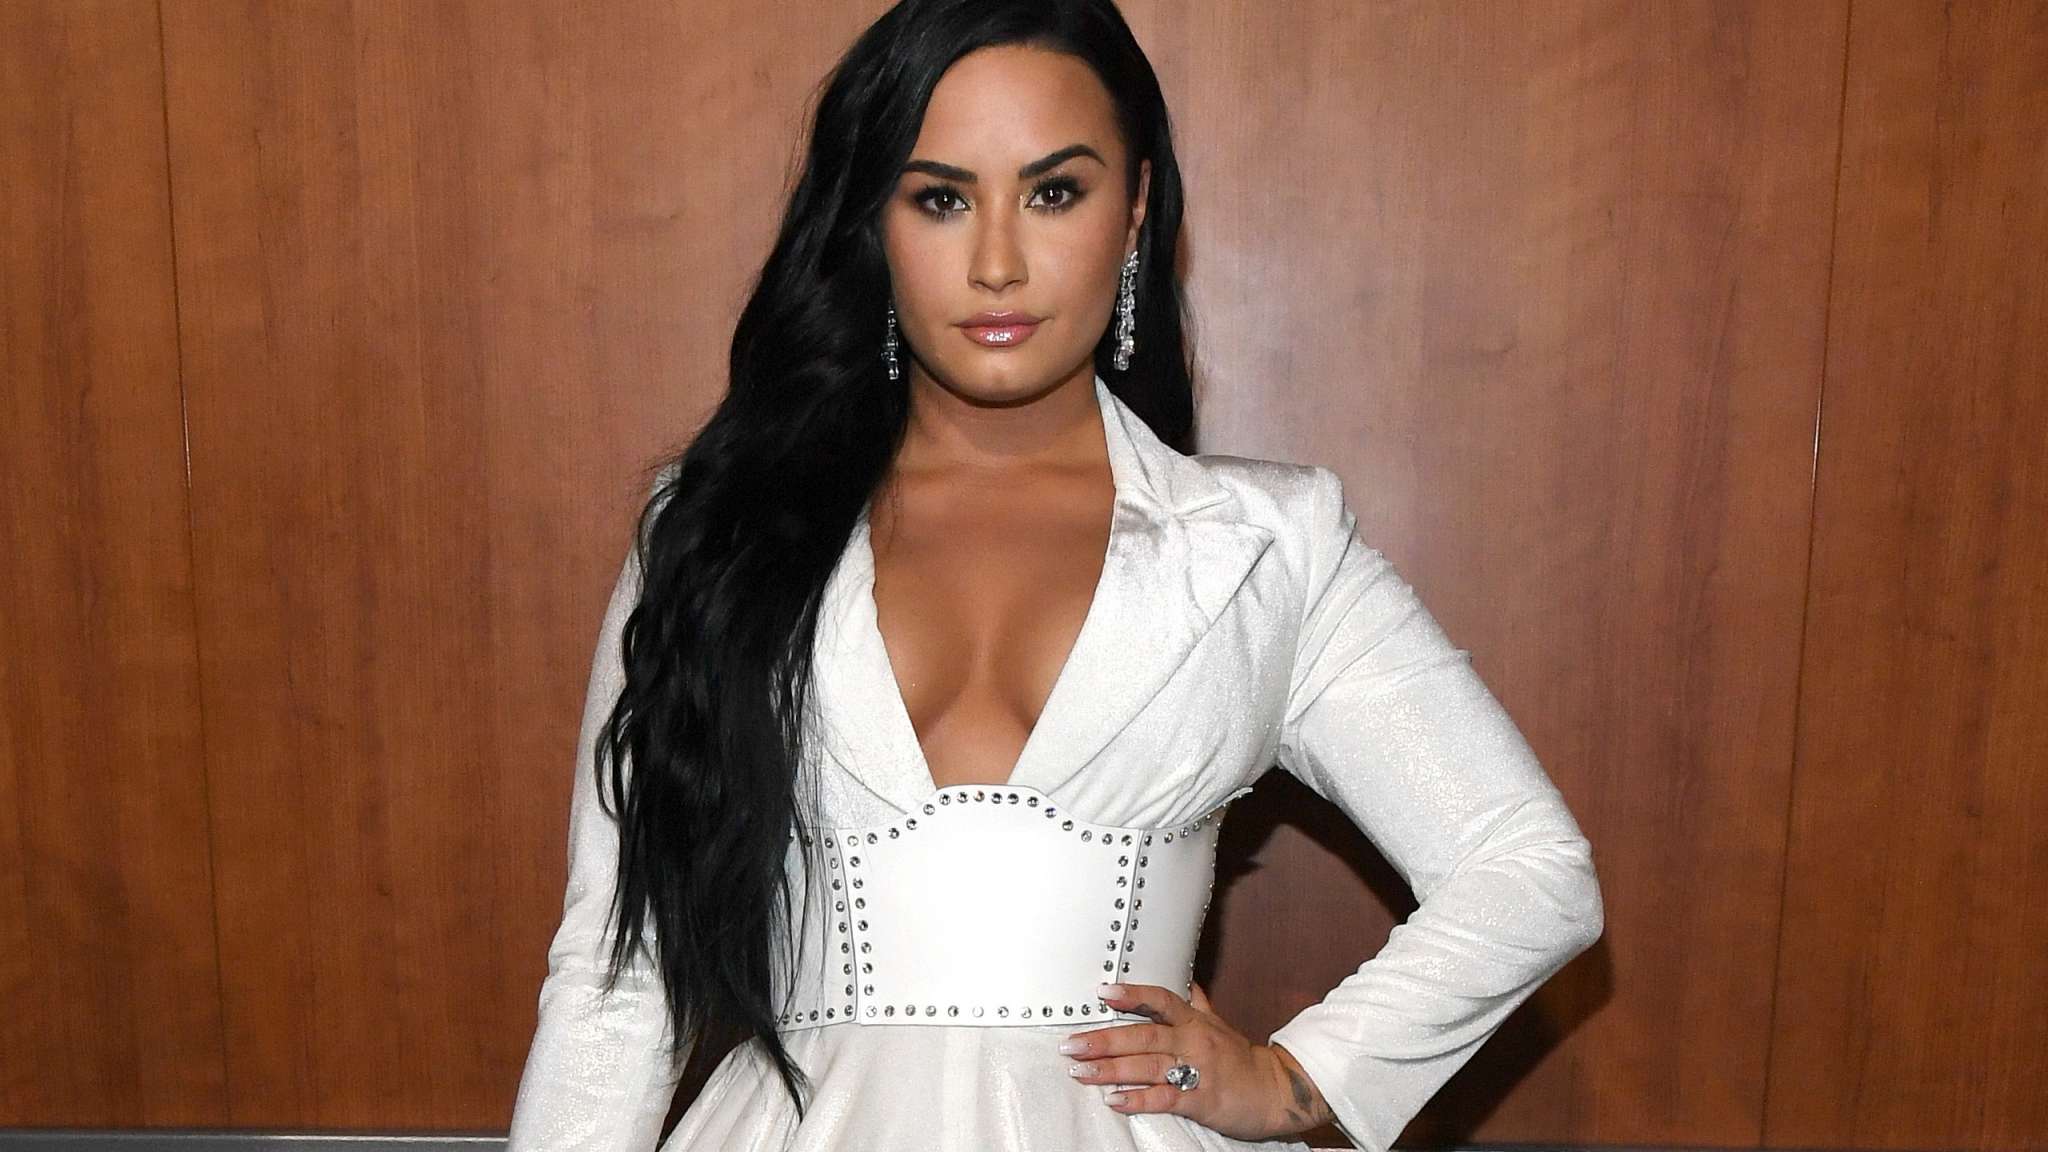 Demi Lovato Reveals She Almost 'Gave Up' And Relapsed Upon Reading Article That Called Her ‘Morbidly Obese’ After Rehab